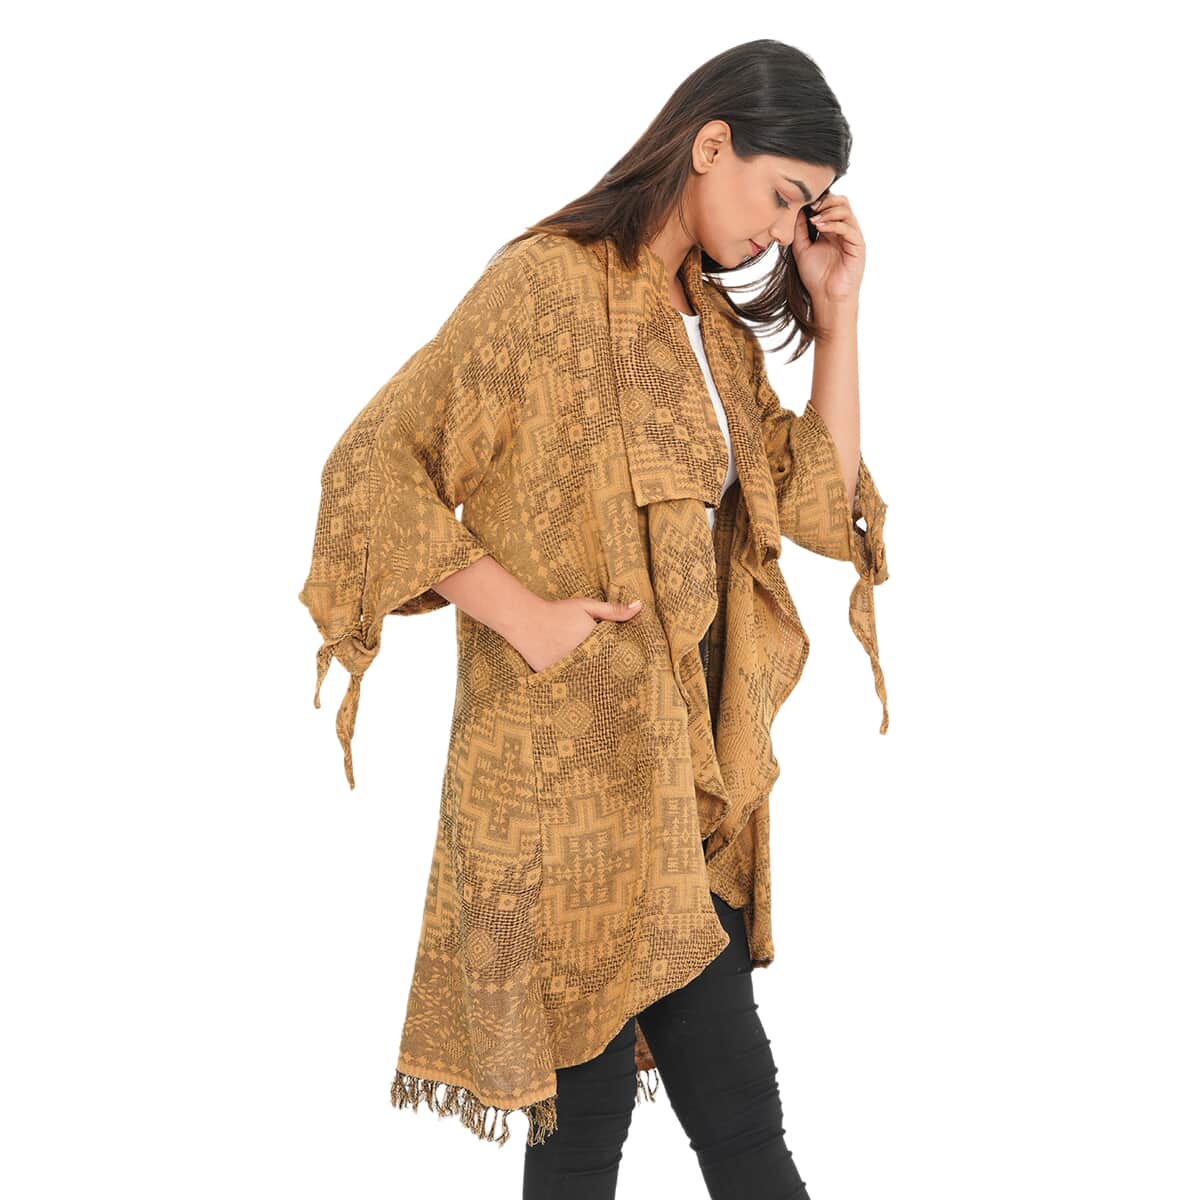 TAMSY Gold 100% Cotton Double Layer Jacquard Waterfall Front Cardigan - One Size Missy (35"x24") image number 3